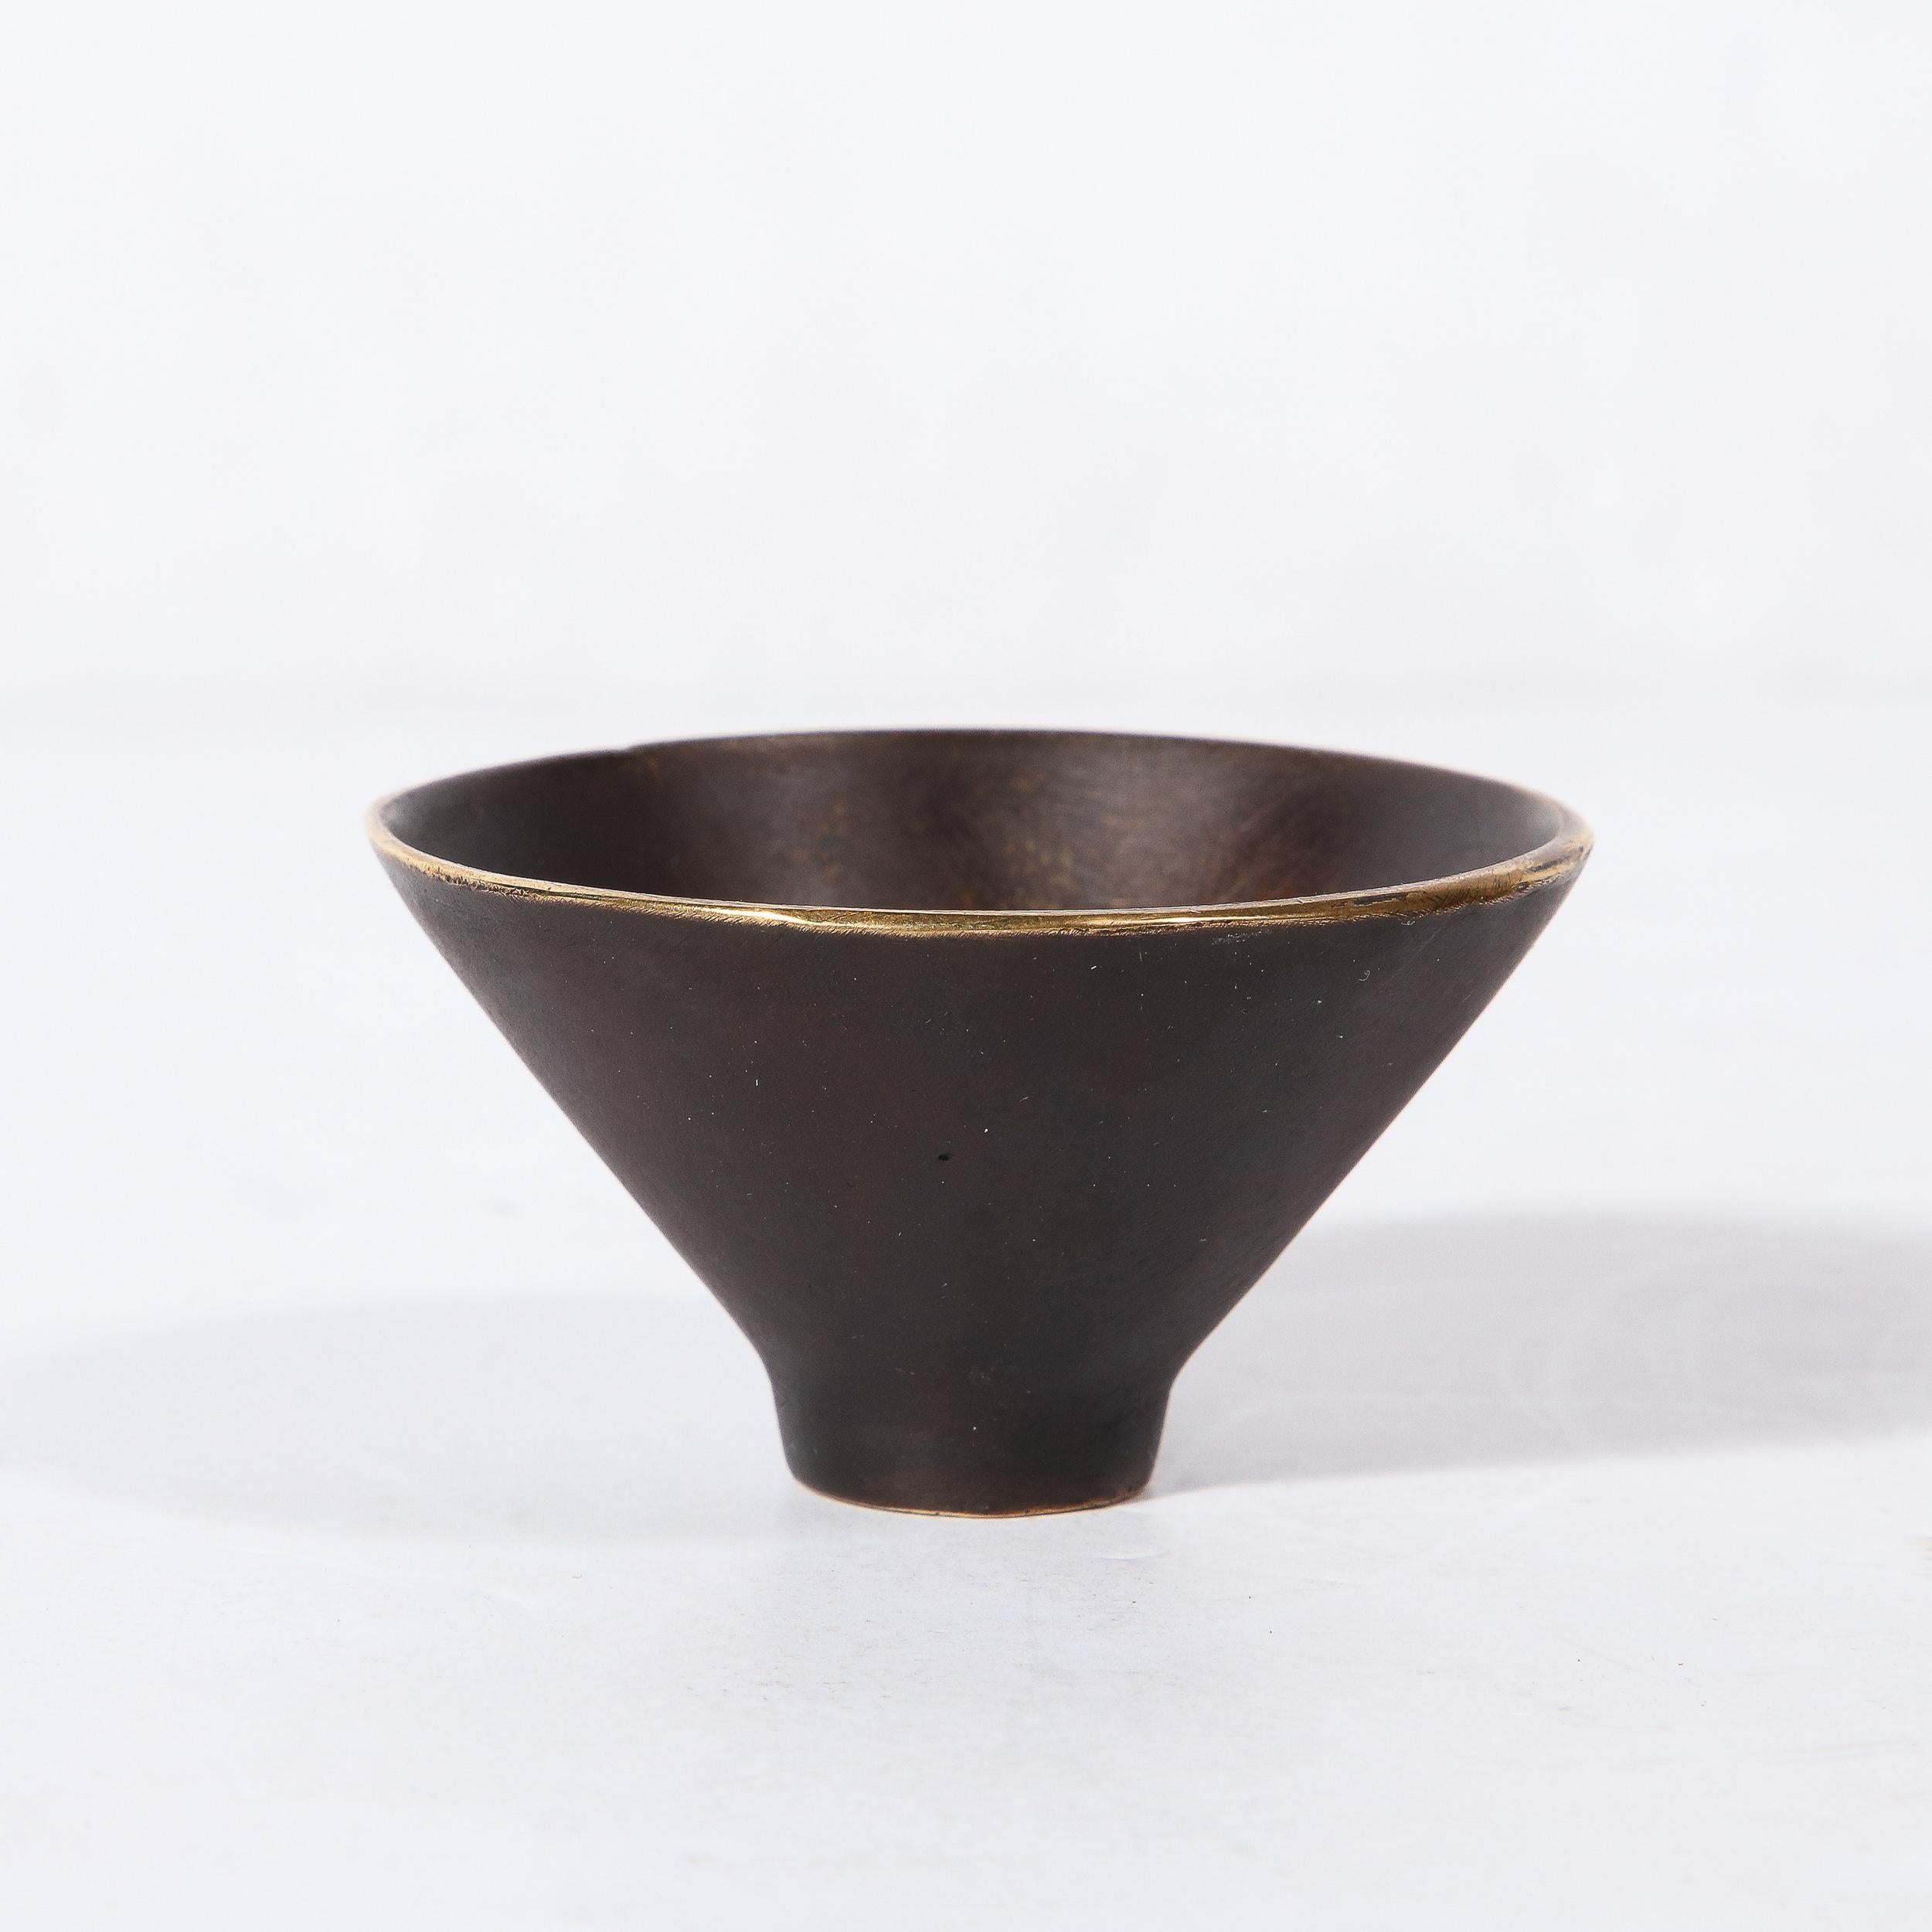 This stunning and minimal Mid-Century Modernist patinated Brass Conical Dish was made by the esteemed artist Carl Aubock and originates from Austria, Circa 1950. Features a subtle conical composition rendered in a matt black enamel with an exposed